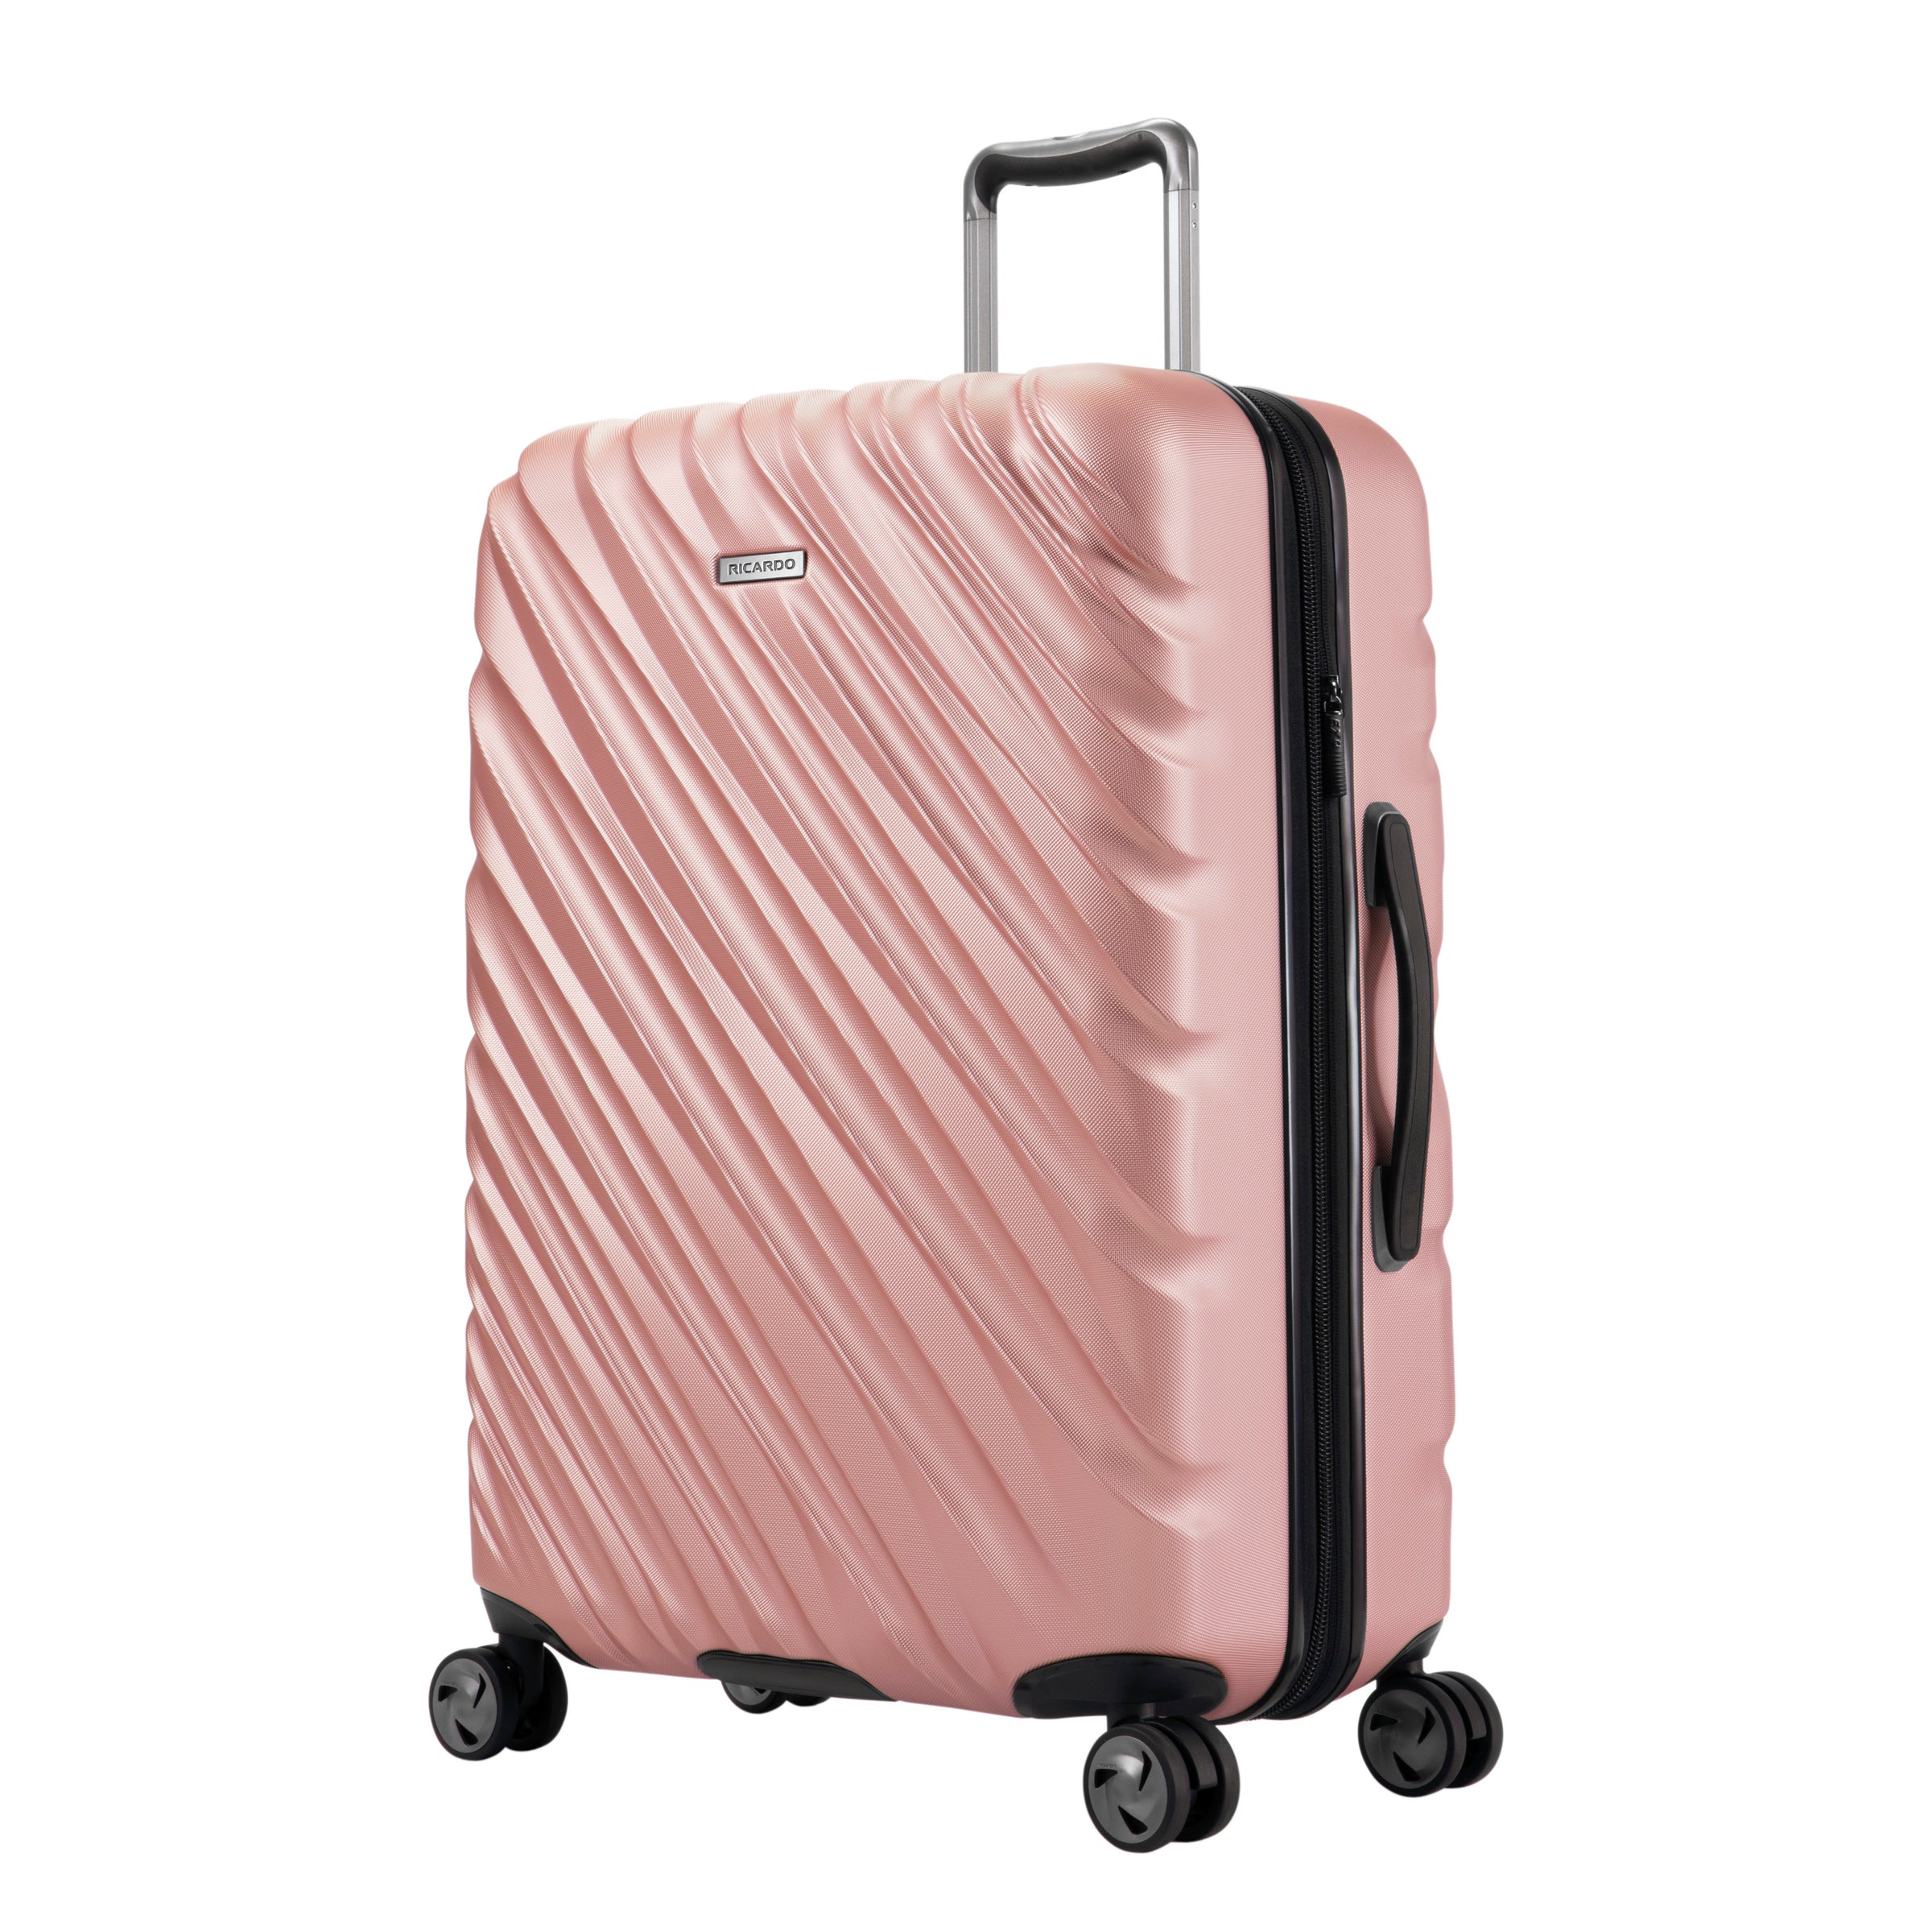 Rose gold hardside suitcase with black zippers and accents